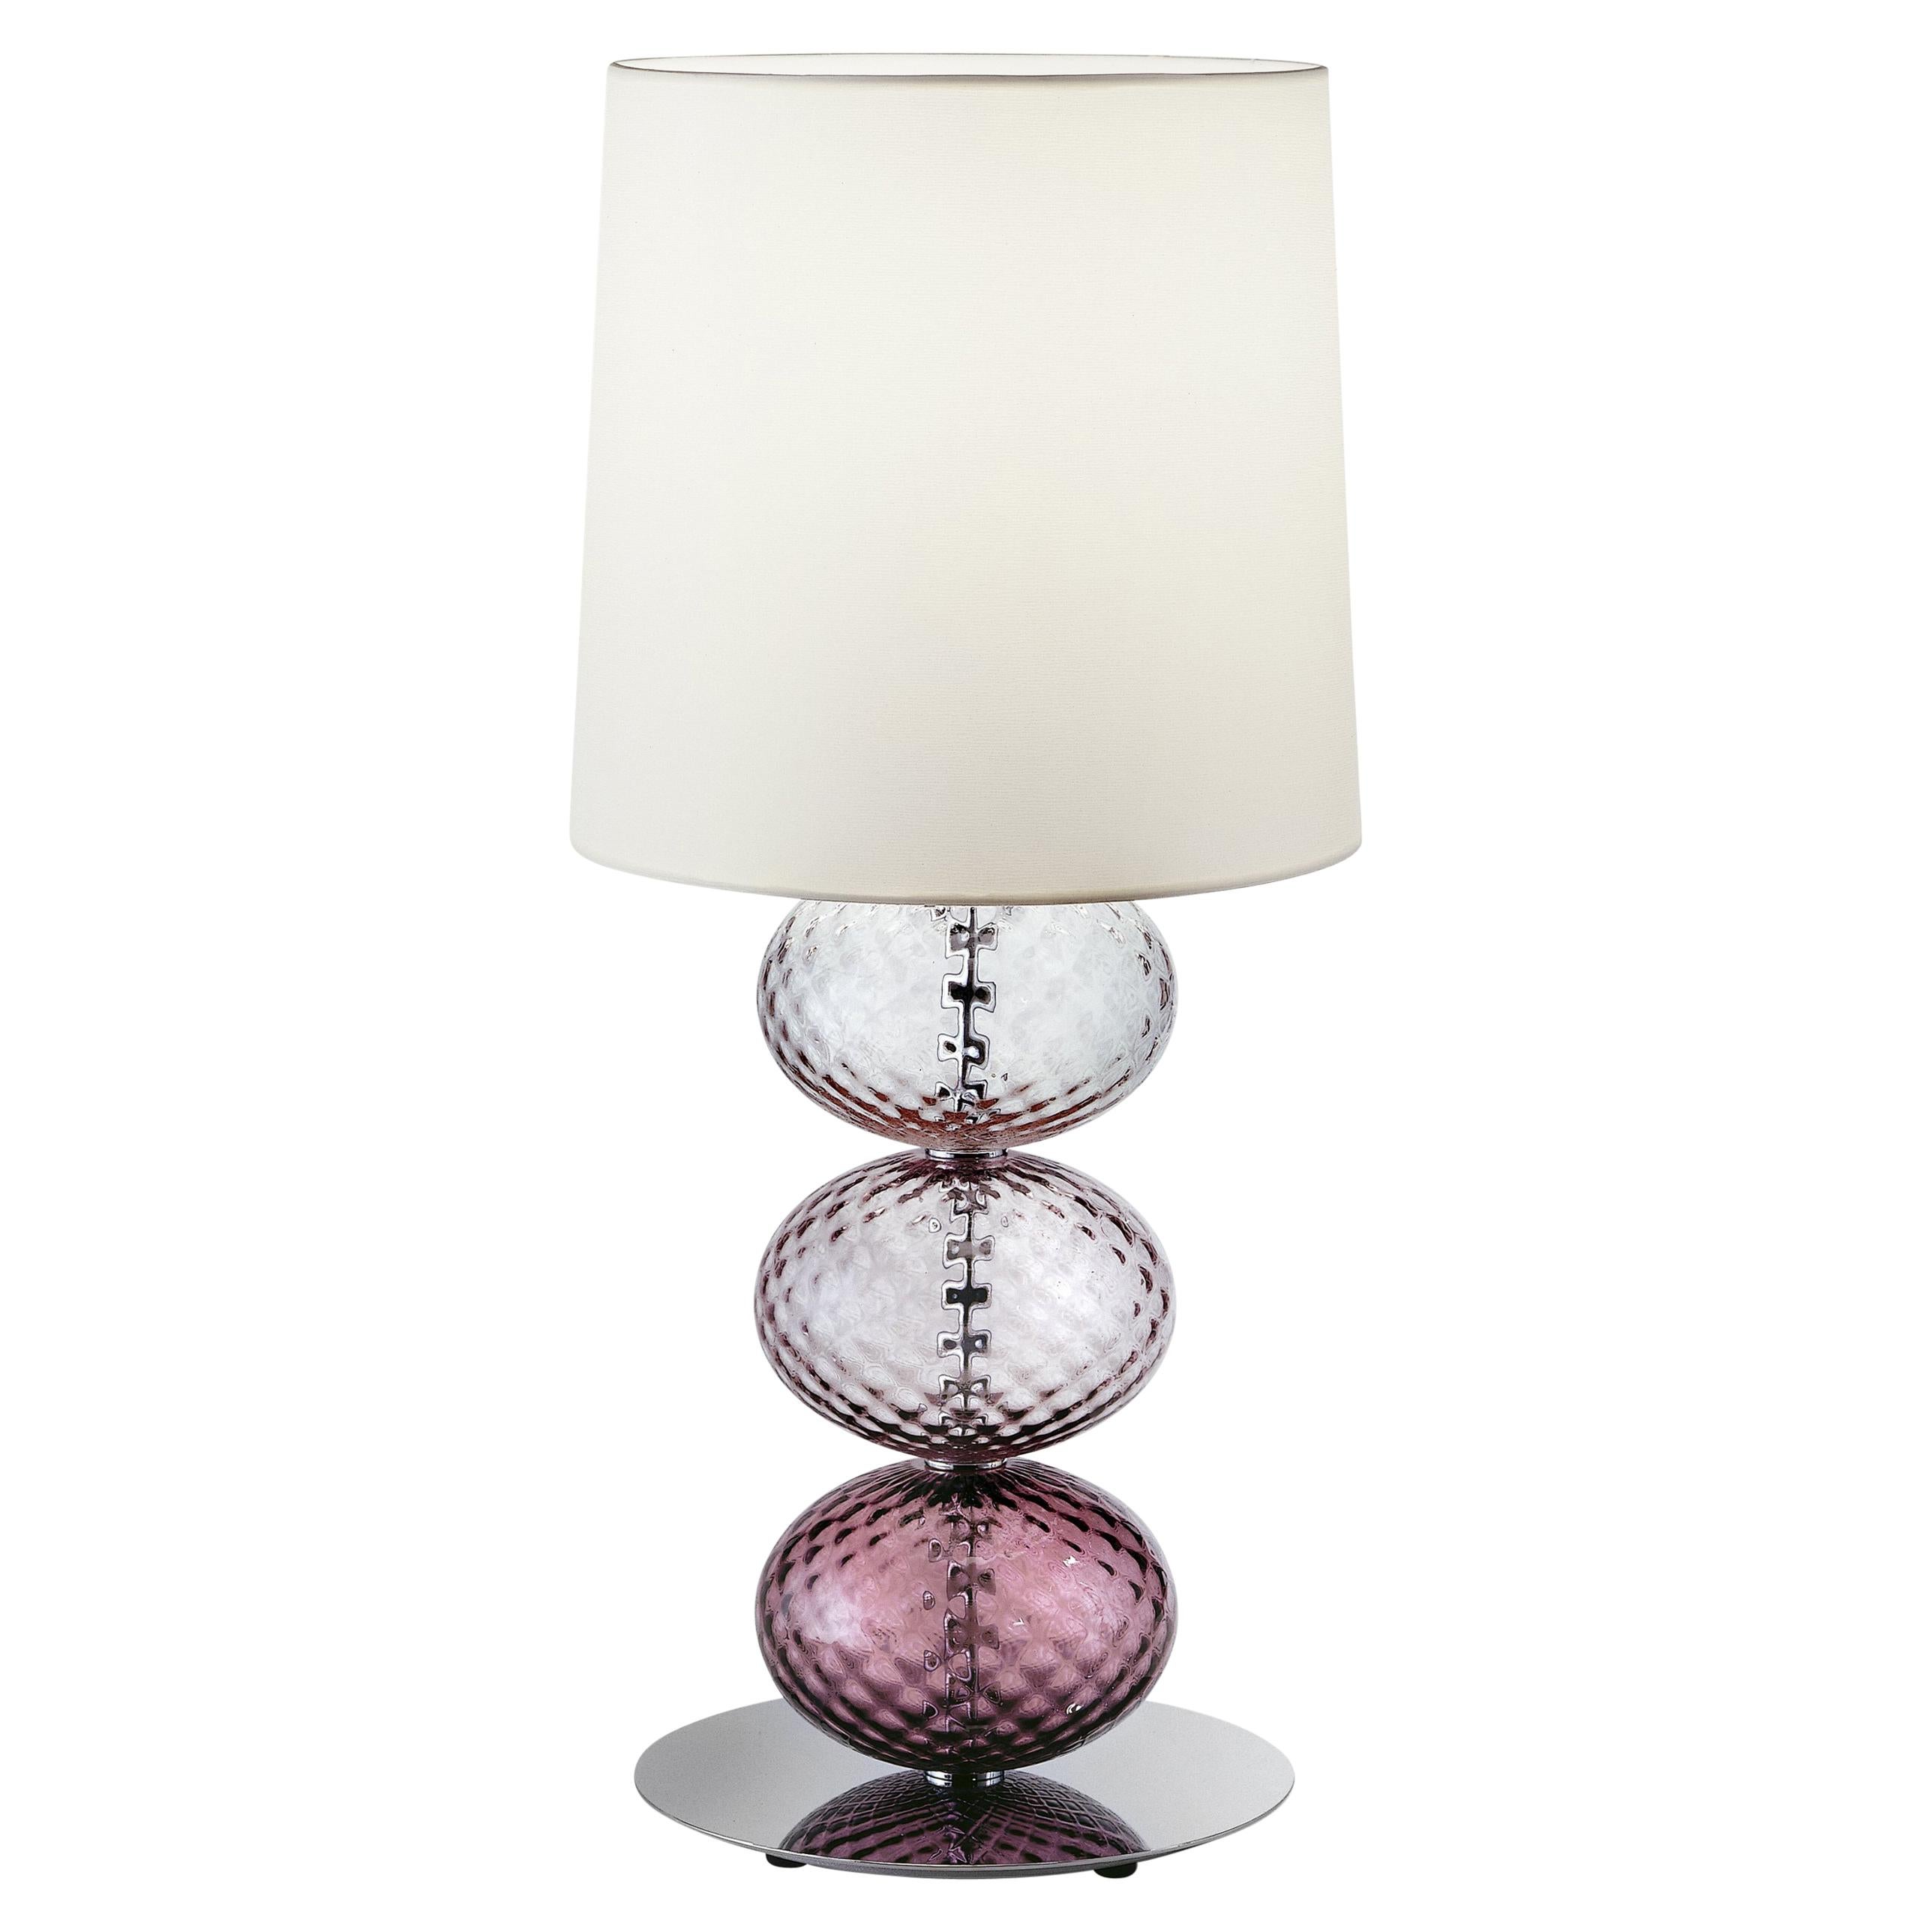 Abat-Jour Bedside table lamp, designed and manufactured by Venini, features elliptical hand-blown elements crafted using the “balloton” technique. 

Dimensions: Ø 33 cm, H 60 cm.